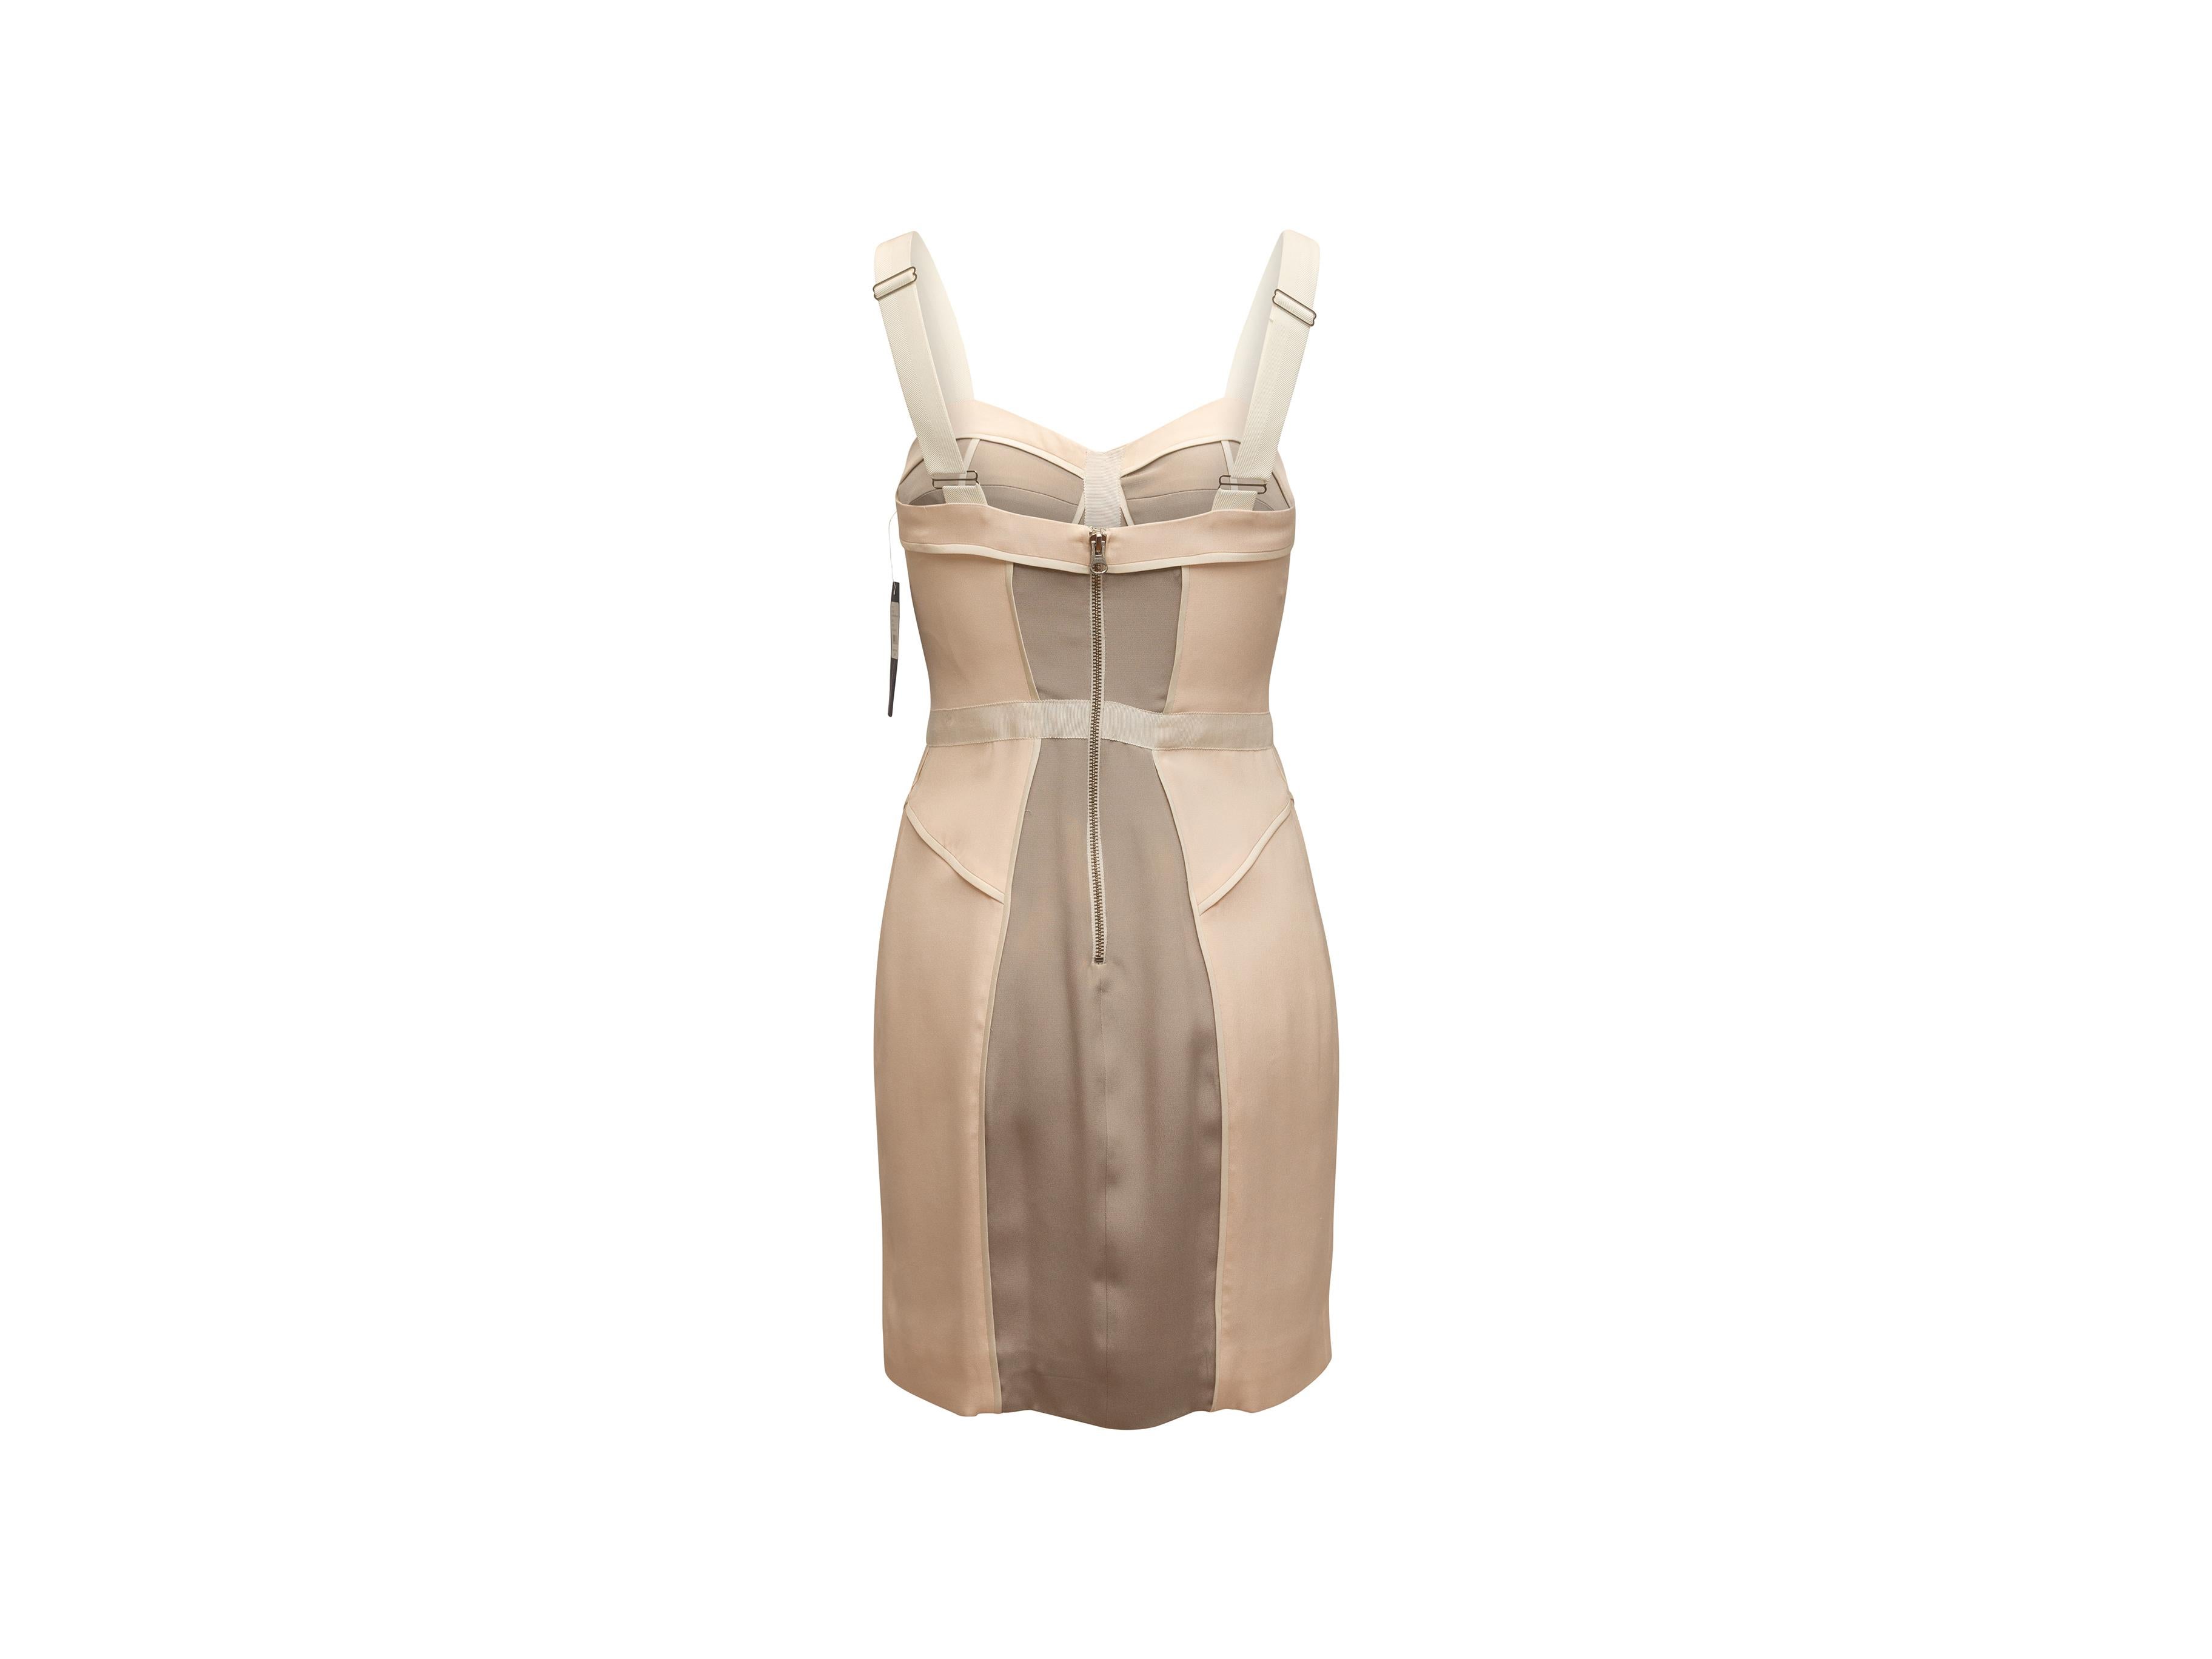 Product details: Beige and taupe sleeveless bustier mini dress by Rebecca Minkoff. Sweetheart neckline. Adjustable straps. Grosgrain trim. Zip closure at center back. 30